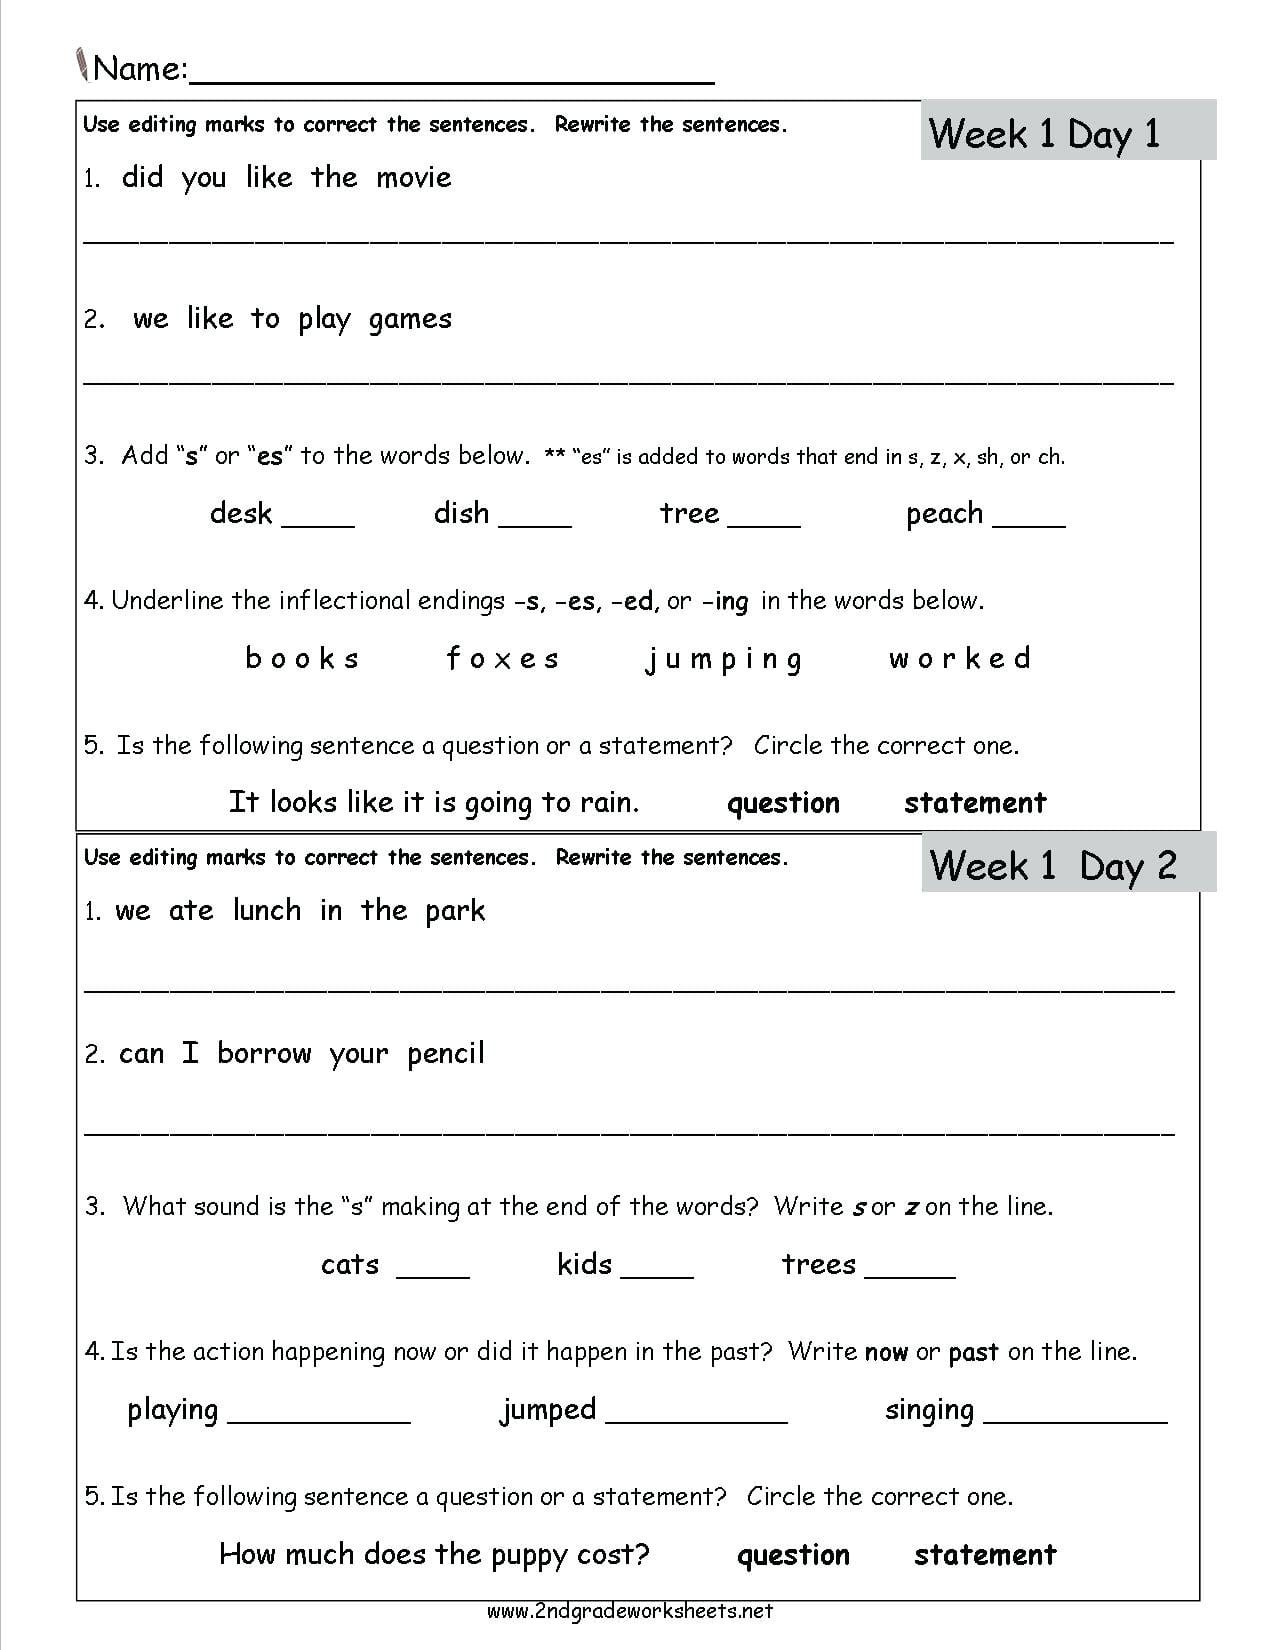 2Nd Grade Science Worksheets For Printable  Math Worksheet For 2Nd Grade Science Worksheets